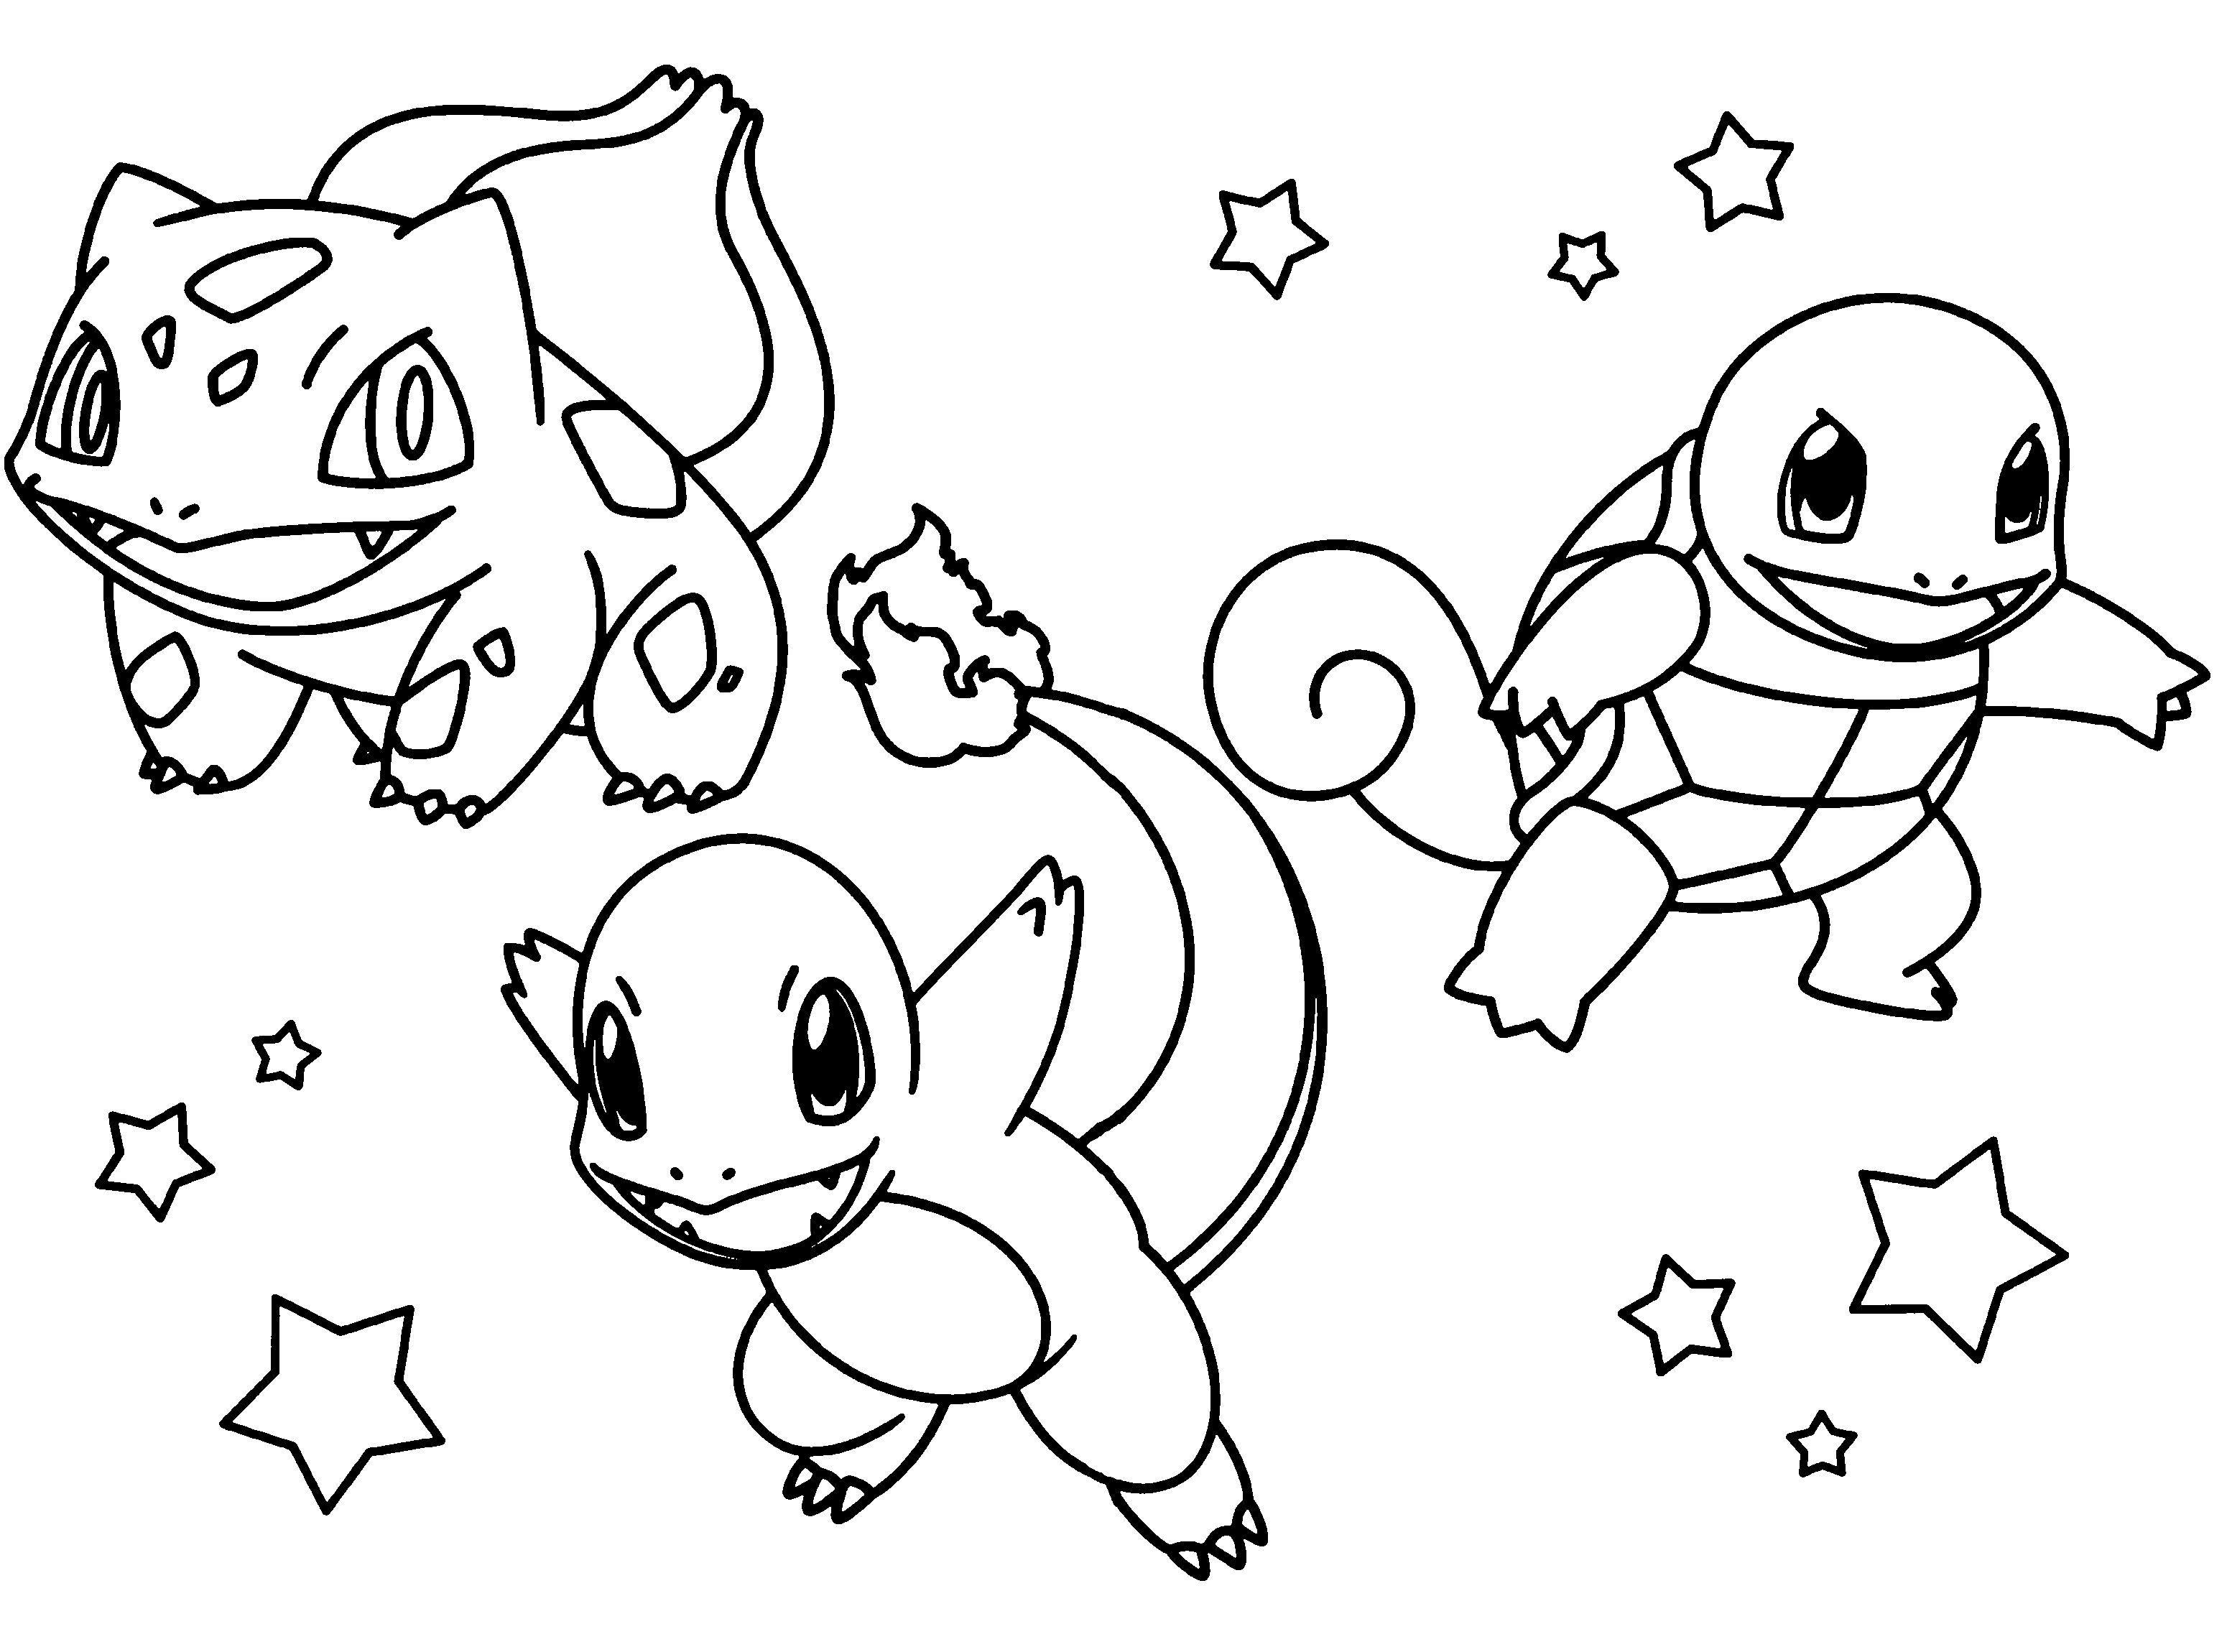 Squirtle Charmander And Pikachu Coloring Pages Sketch Coloring Page